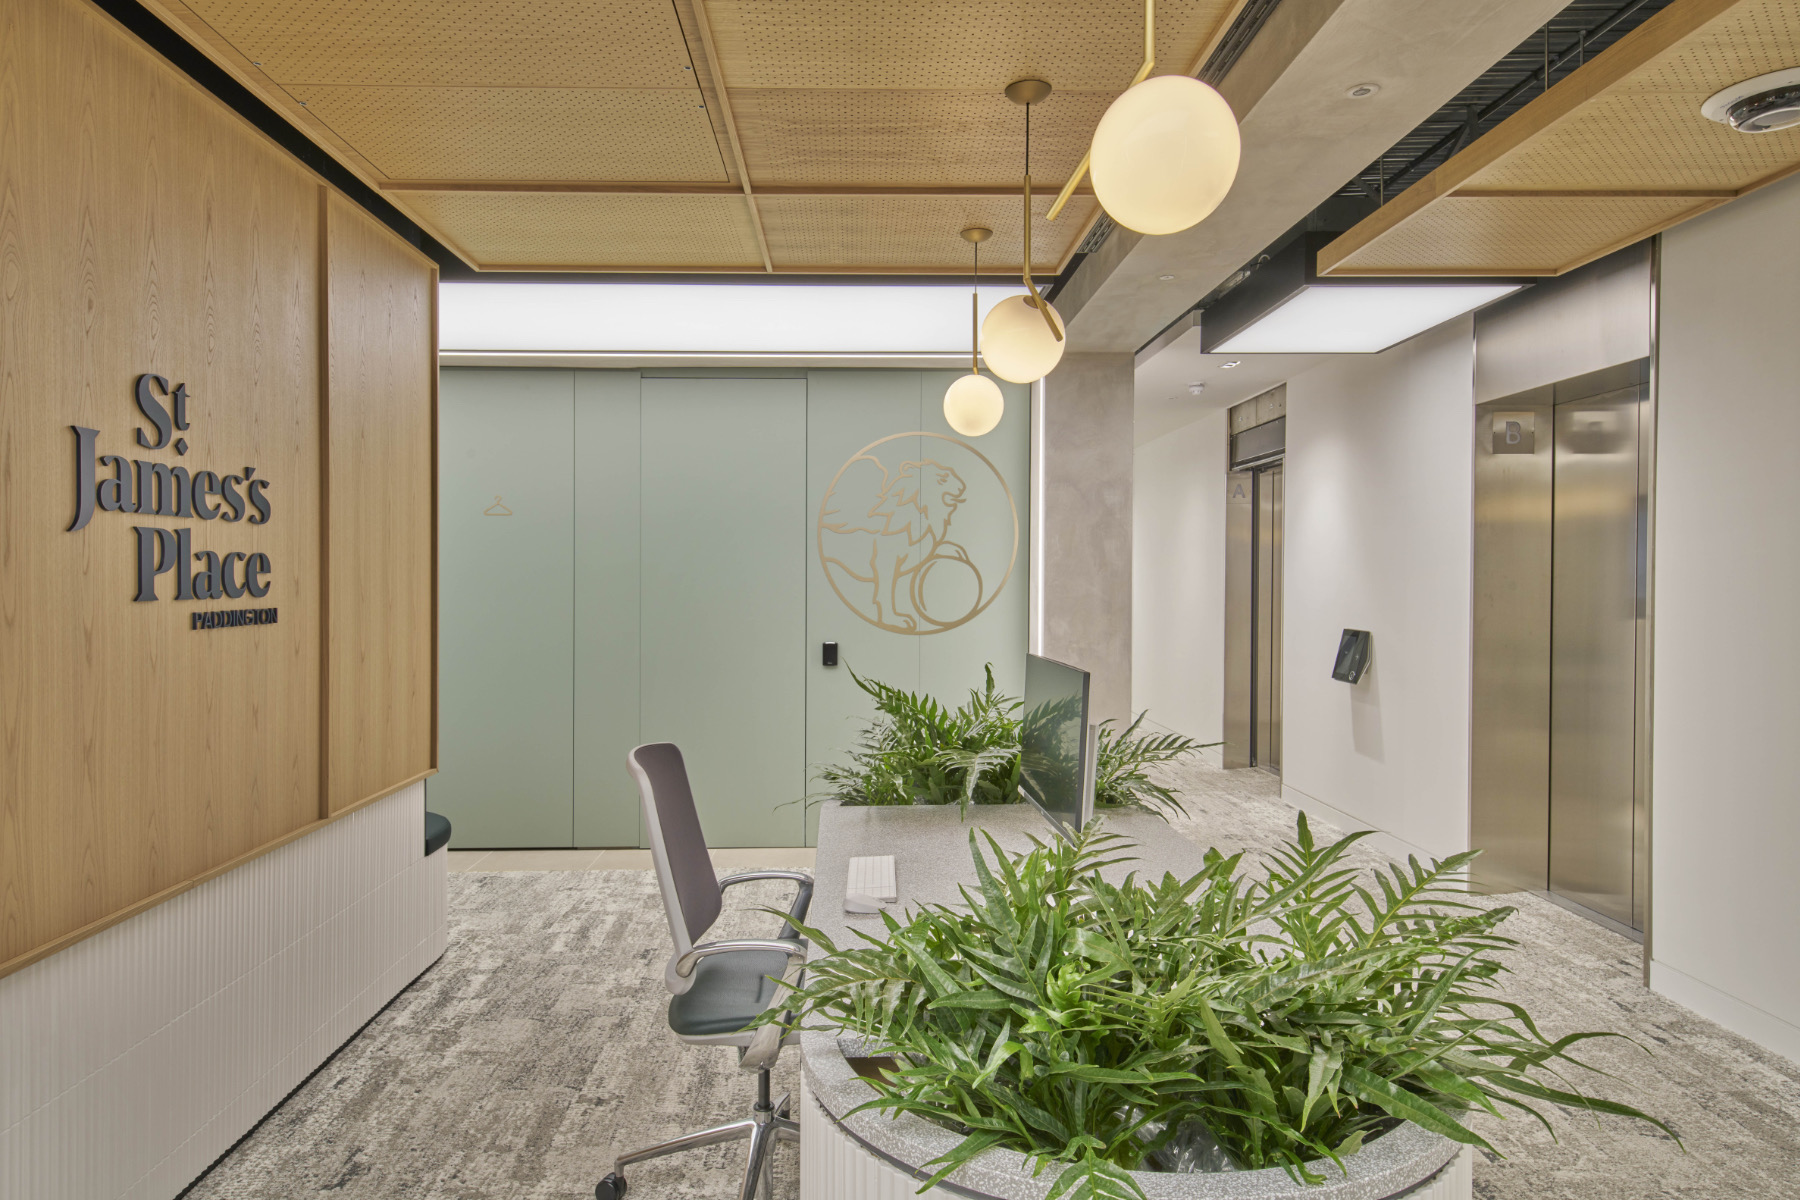 A Look Inside St James’ New London Office